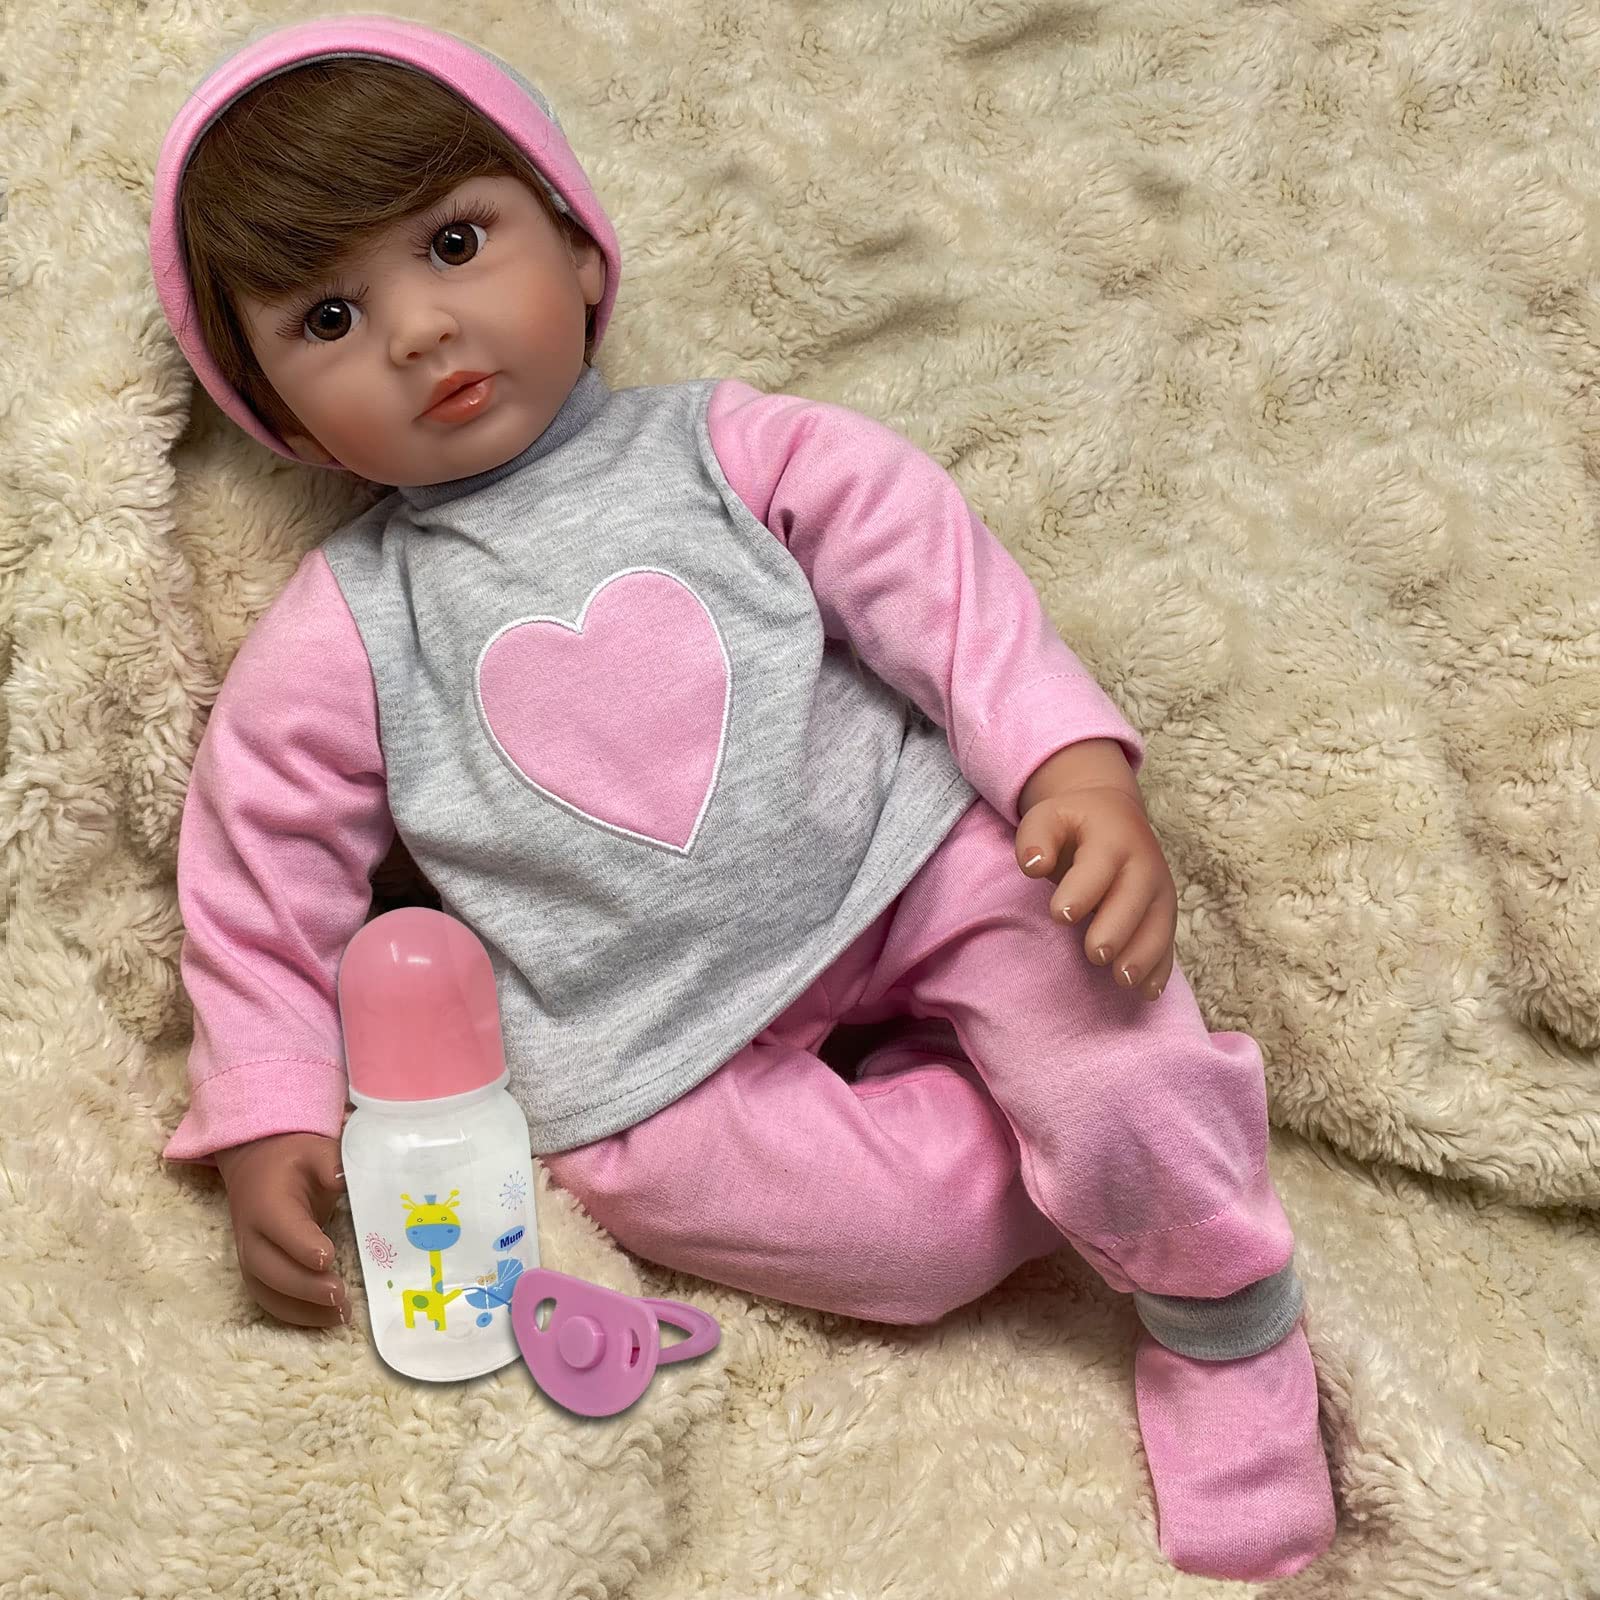 the new york doll co Real Looking Reborn Baby Doll  22A Realistic Baby Doll That Looks Real  Weighted Soft Newborn Silicone Baby Doll Gift Set With O